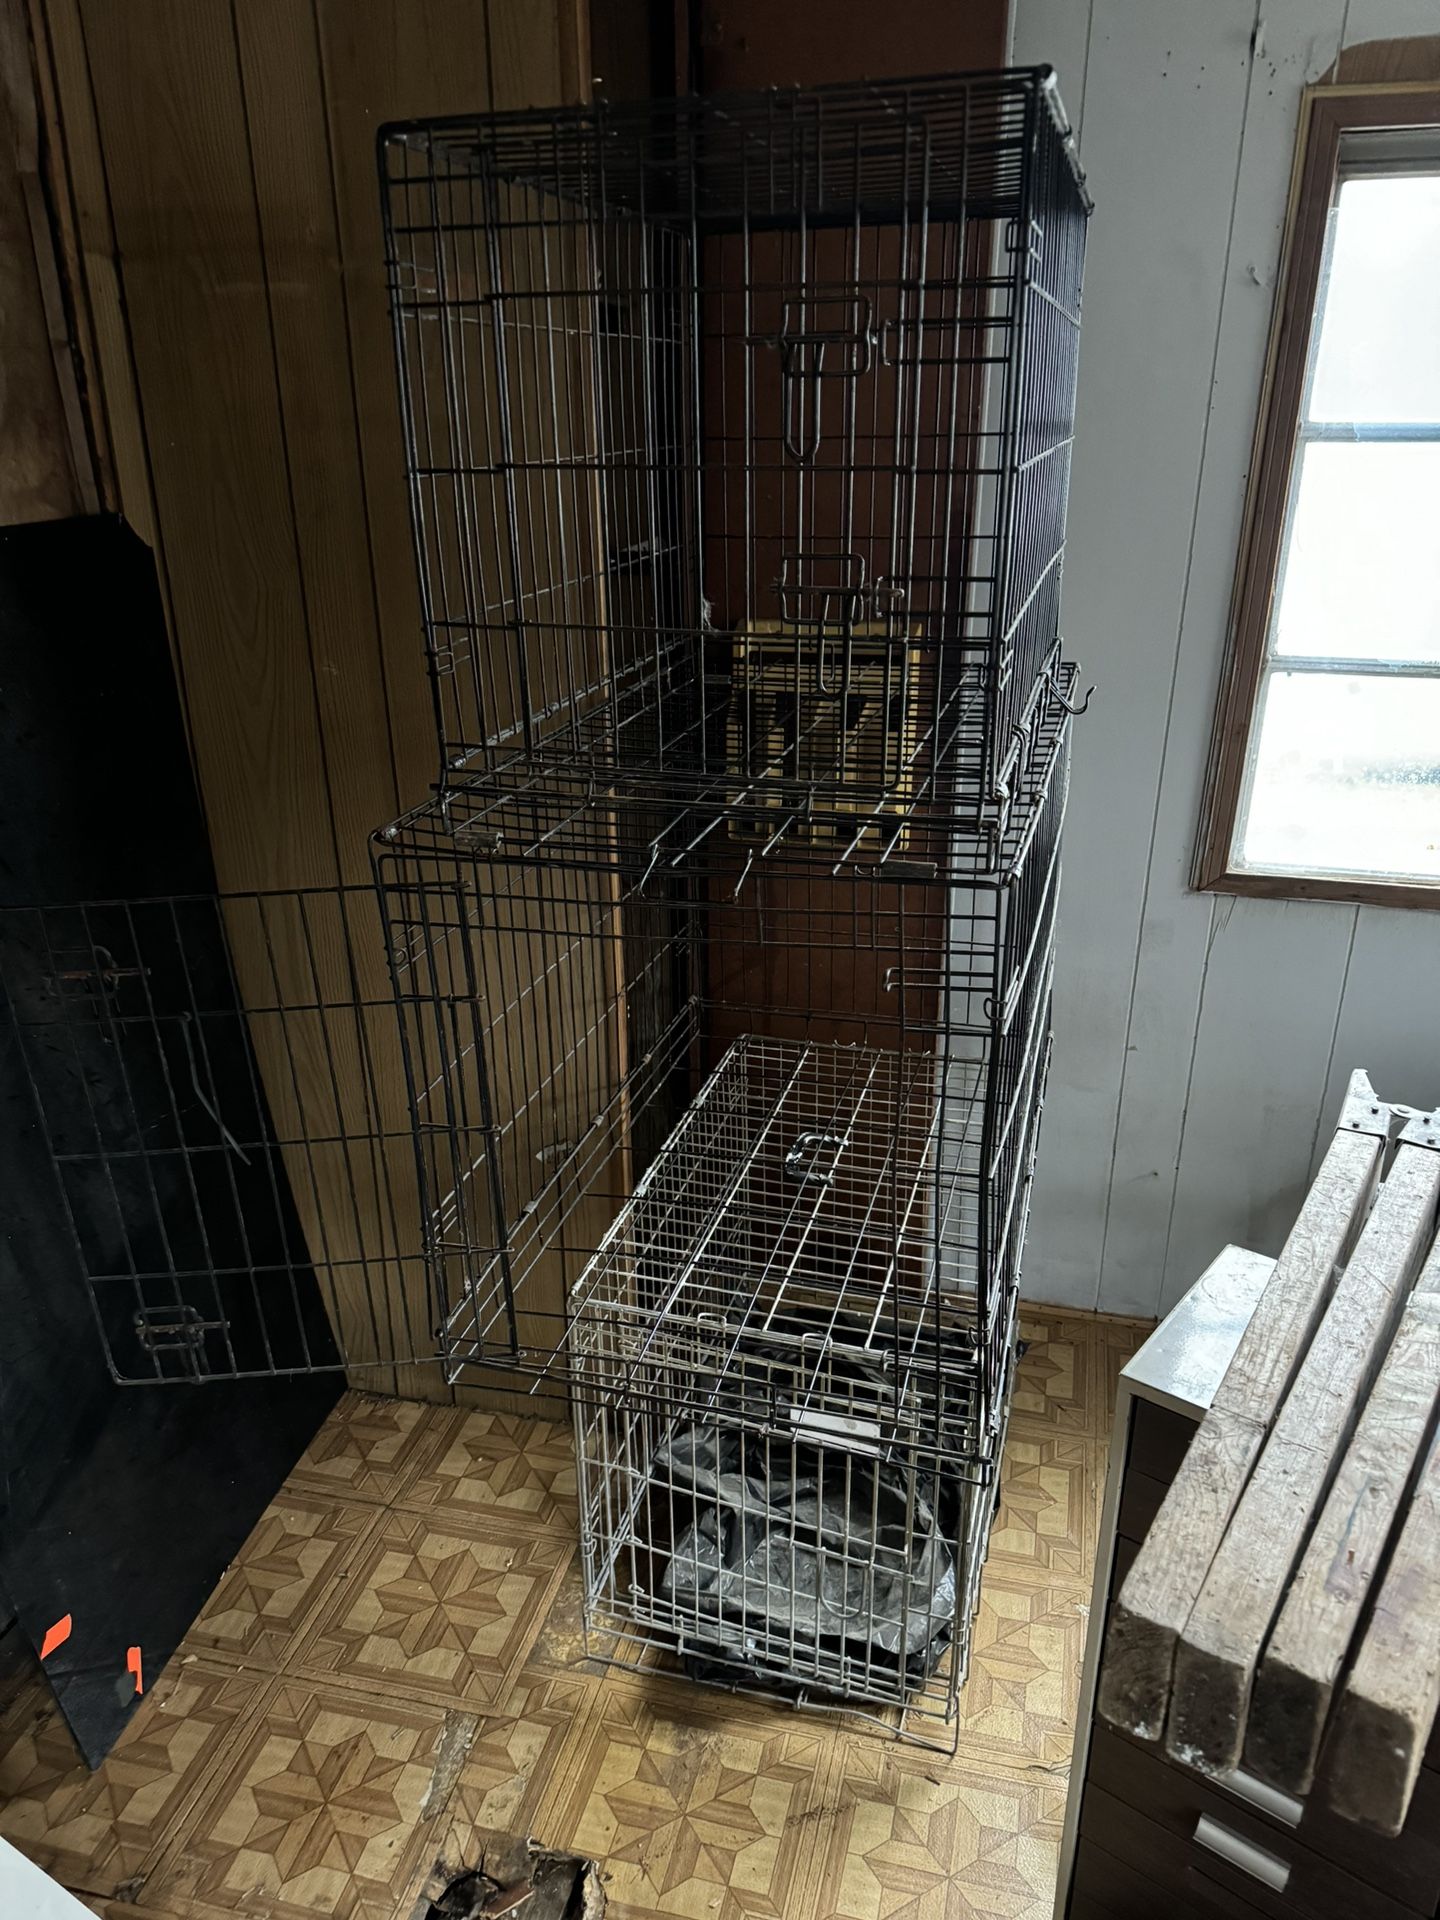 3 Dog Crates With Pans